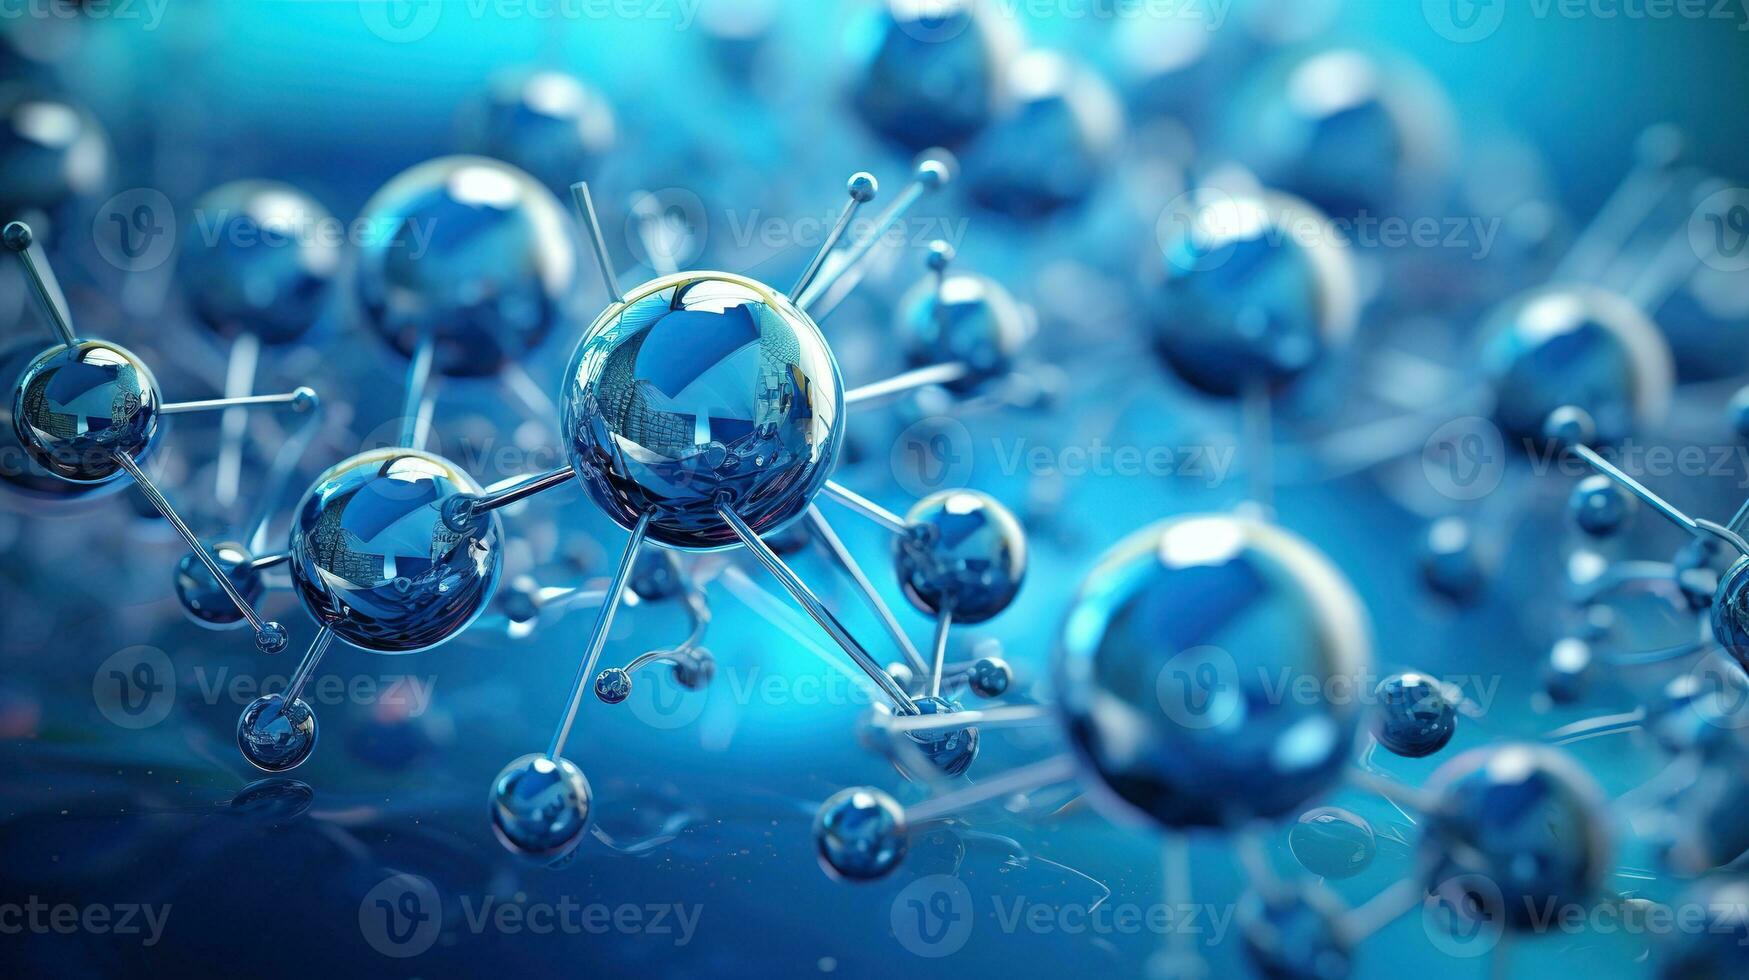 Abstract molecules design. Atoms. Molecular structure with blue spherical particles. photo